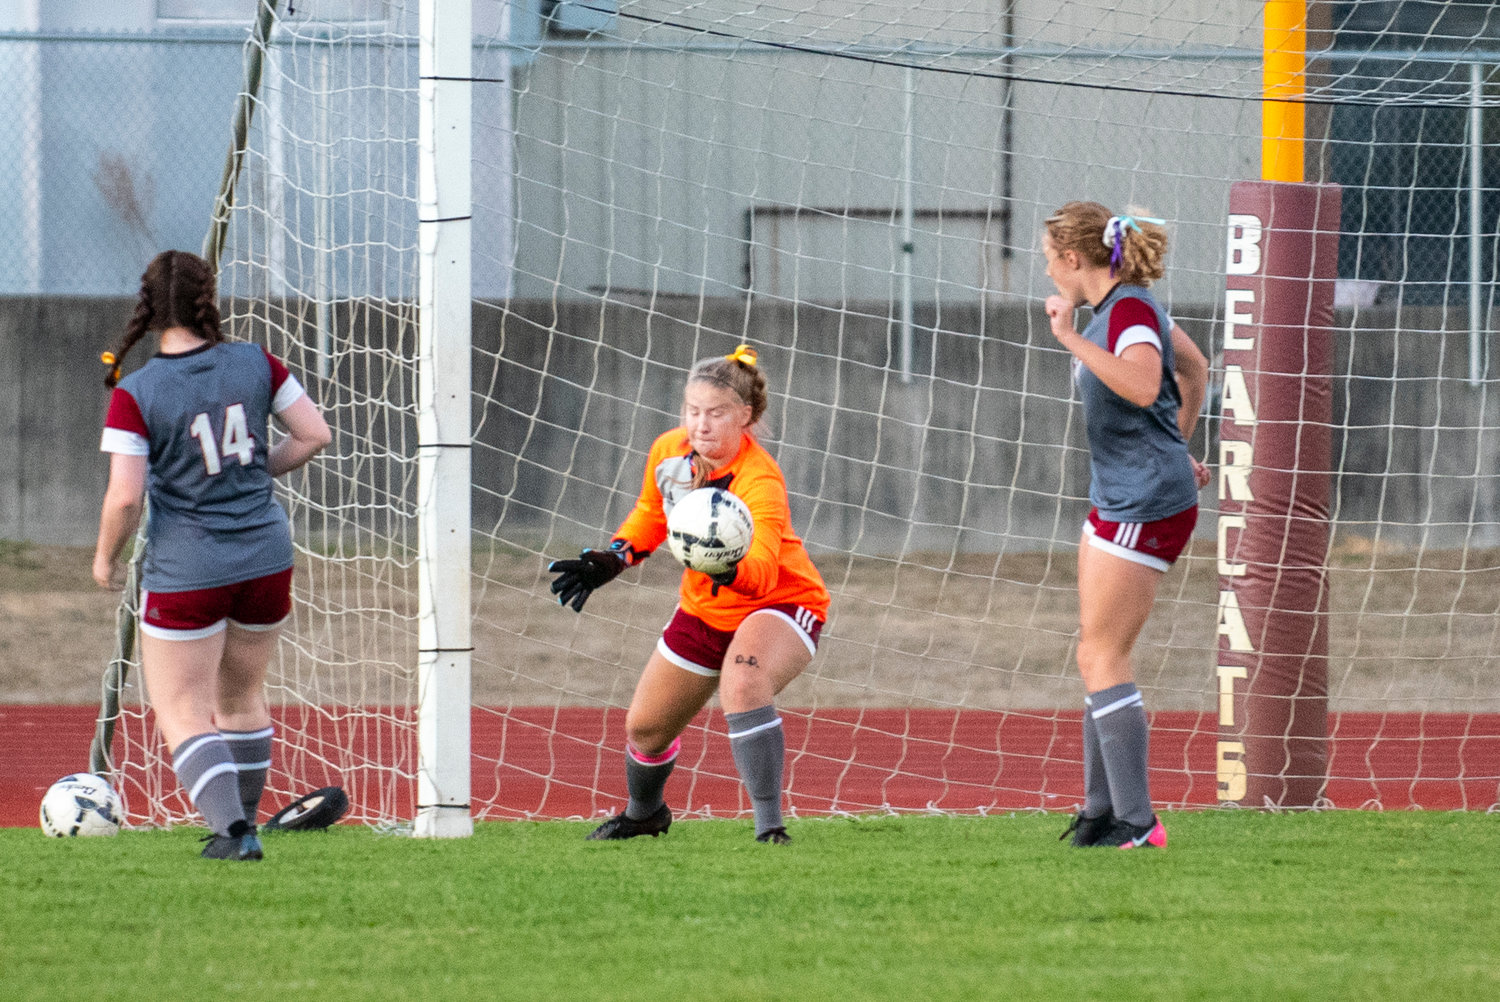 W.F. West keeper Carlie Deskins makes a save on a Tumwater shot on Tuesday in Chehalis.